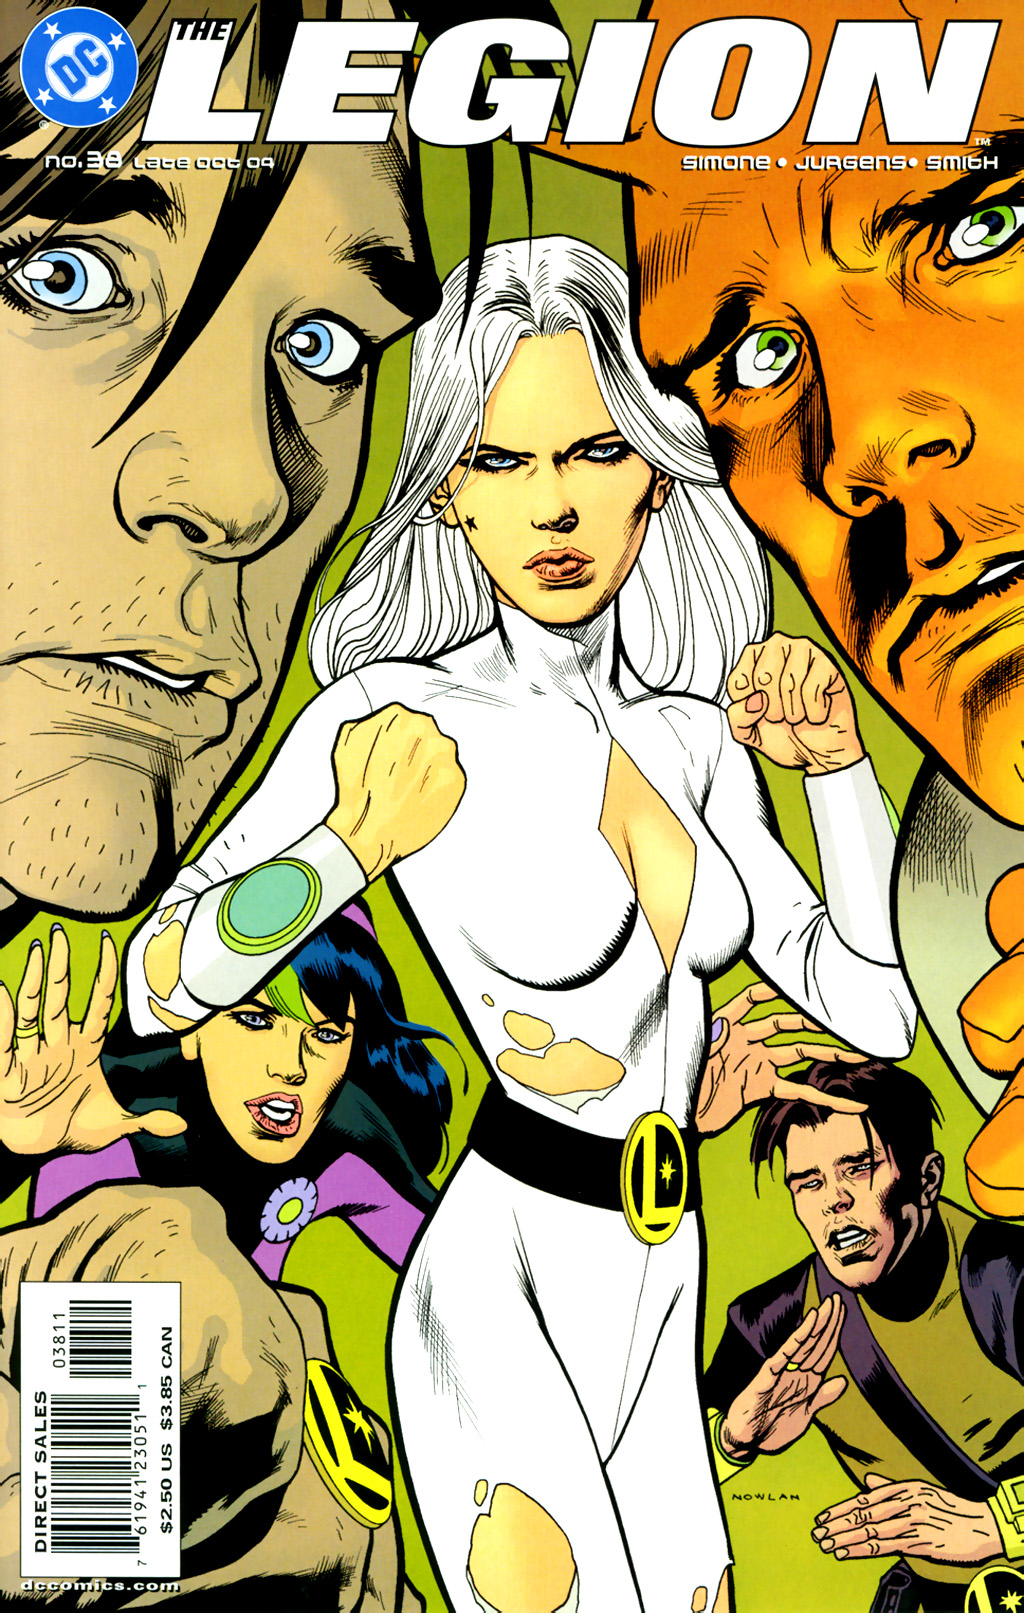 Read online The Legion comic -  Issue #38 - 1